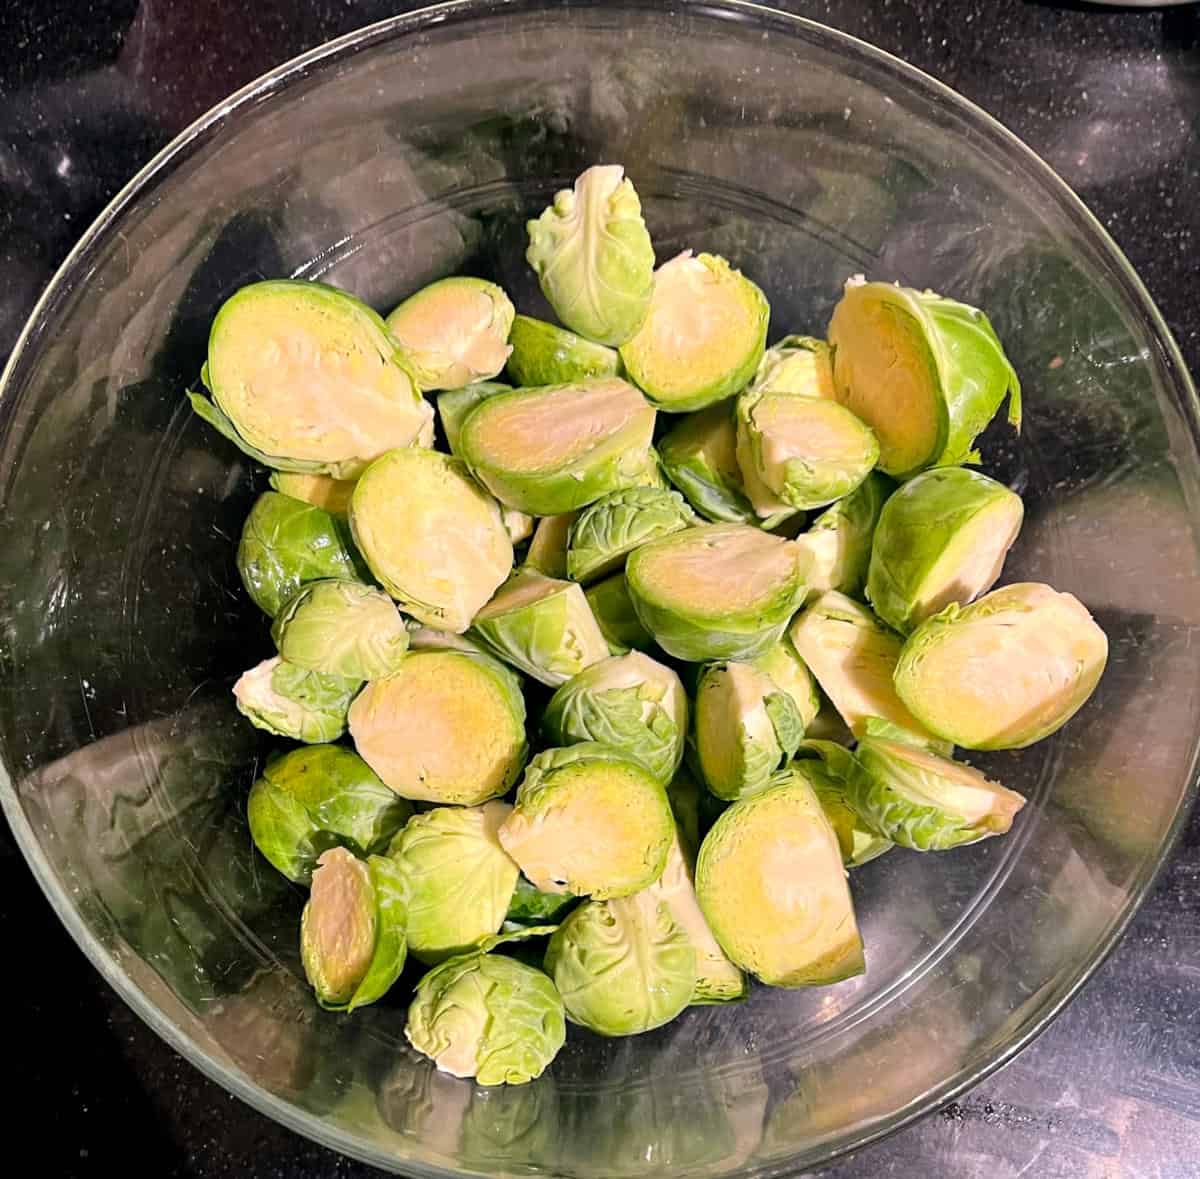 Chopped Brussels sprouts in bowl.